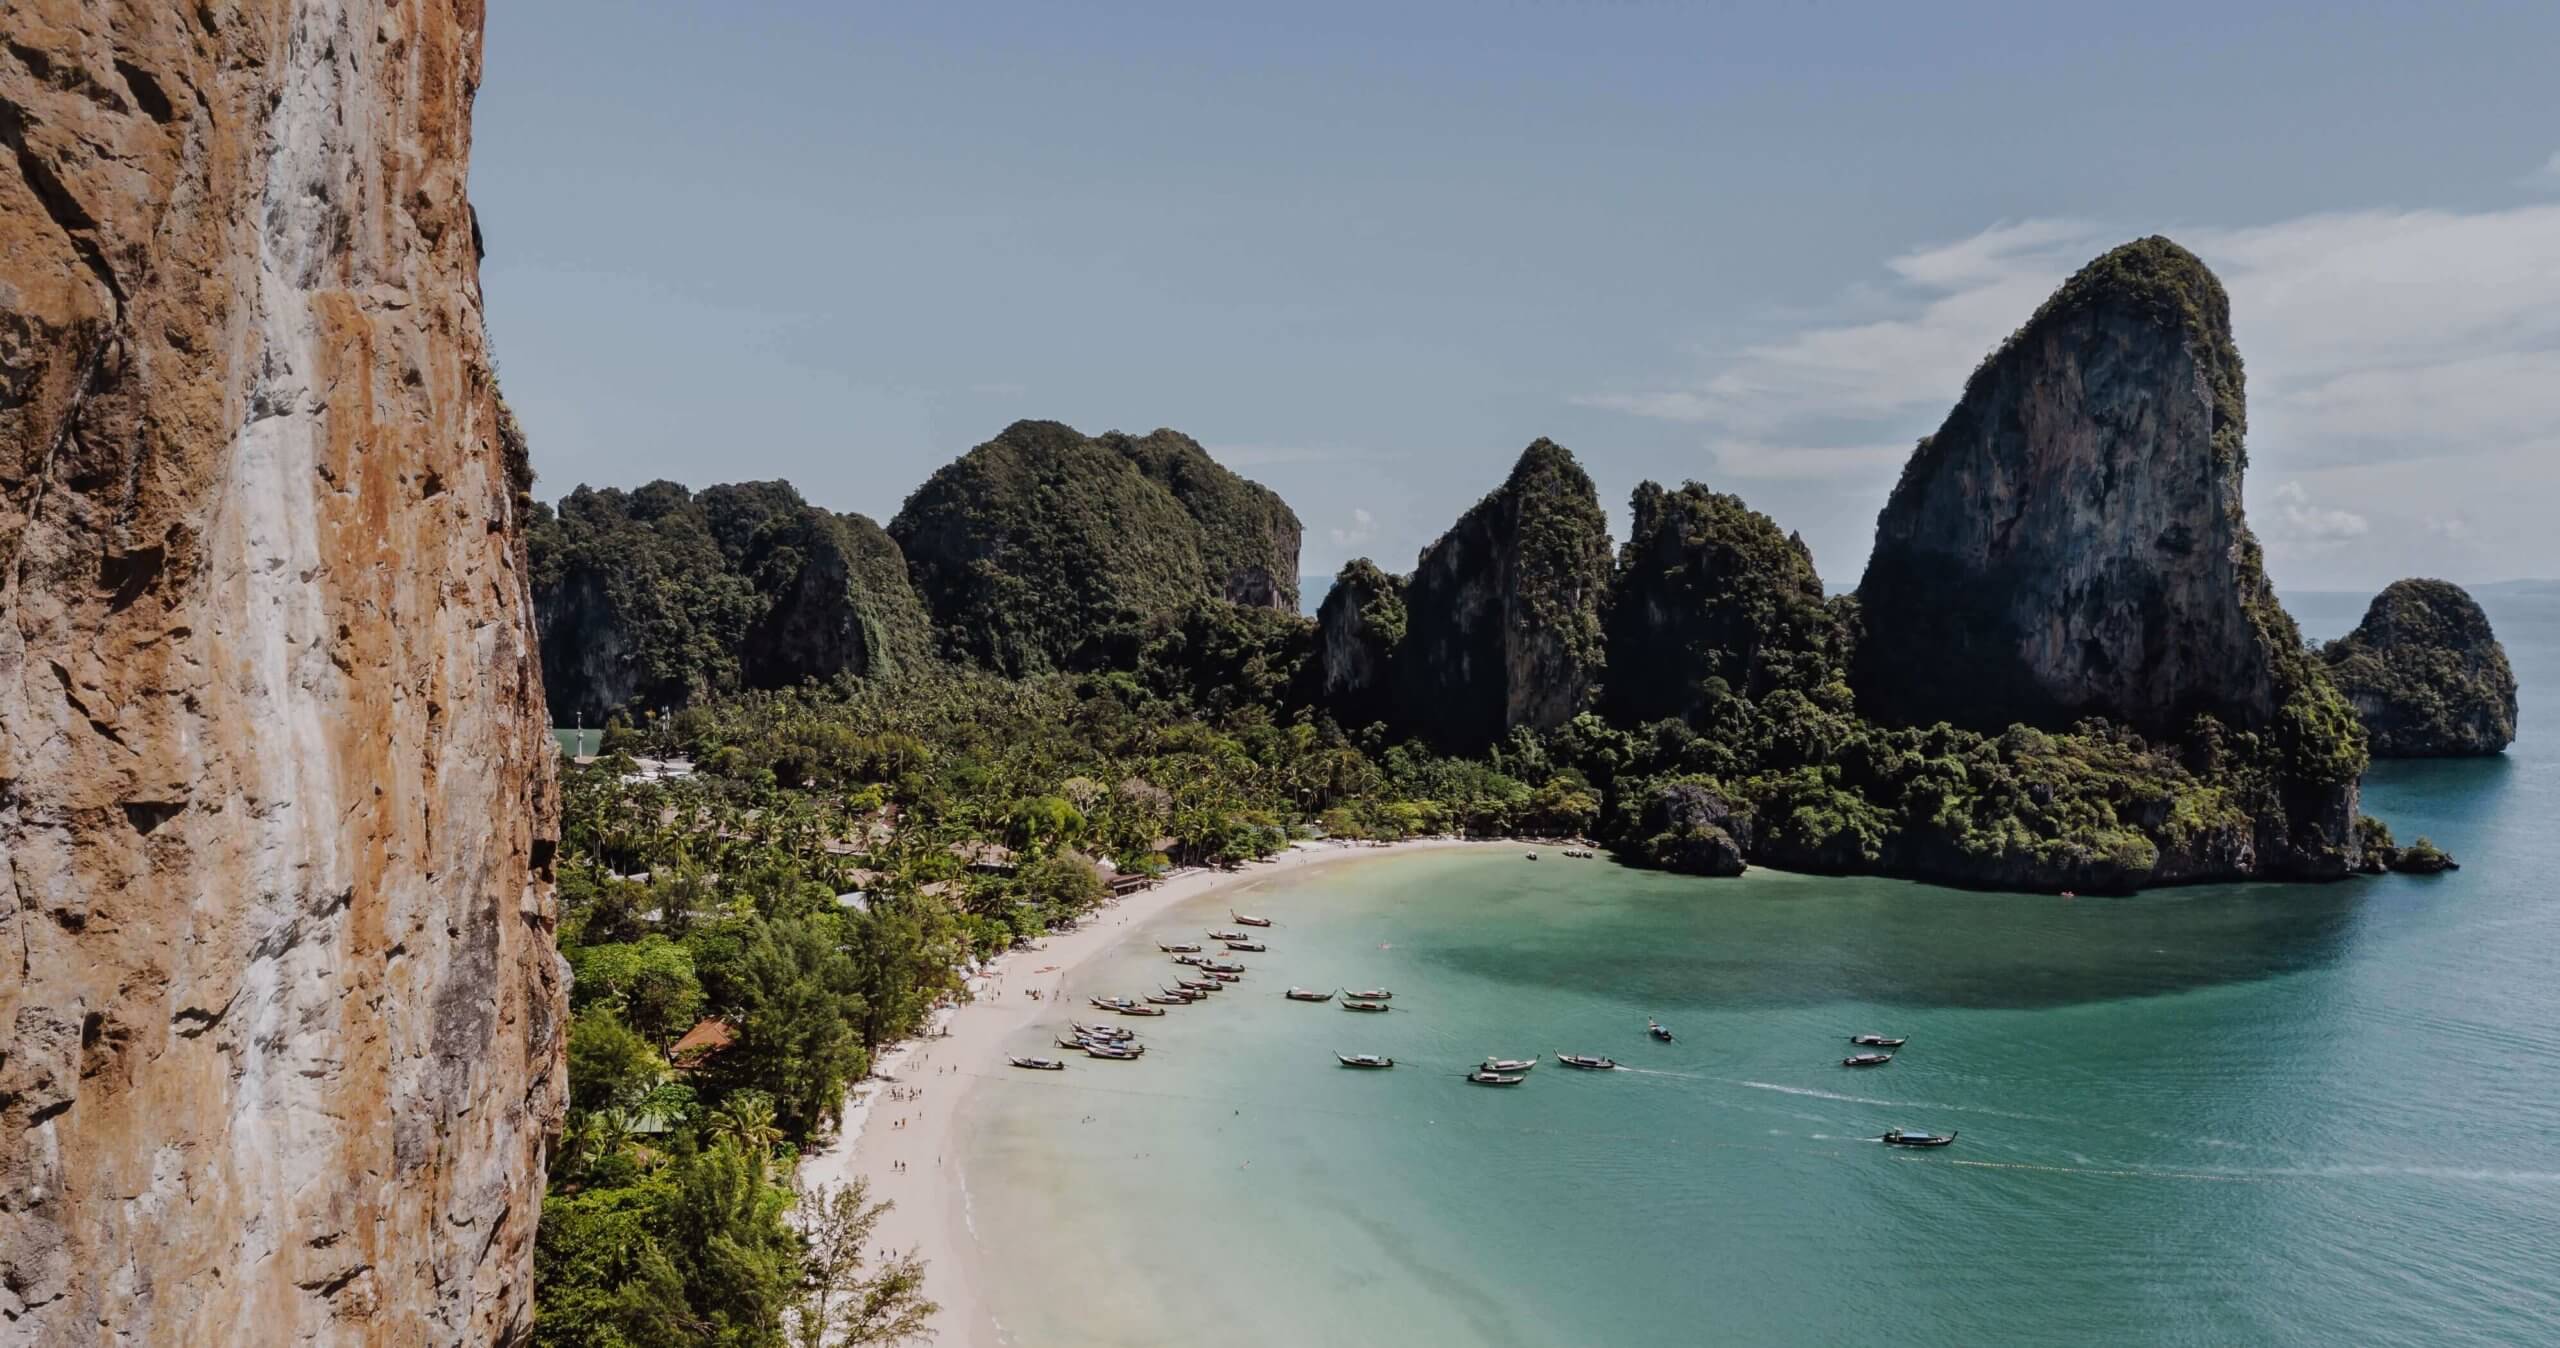 Toronto to Thailand, Vietnam, Malaysia or Cambodia w/ China Southern Airlines [Apr-May]